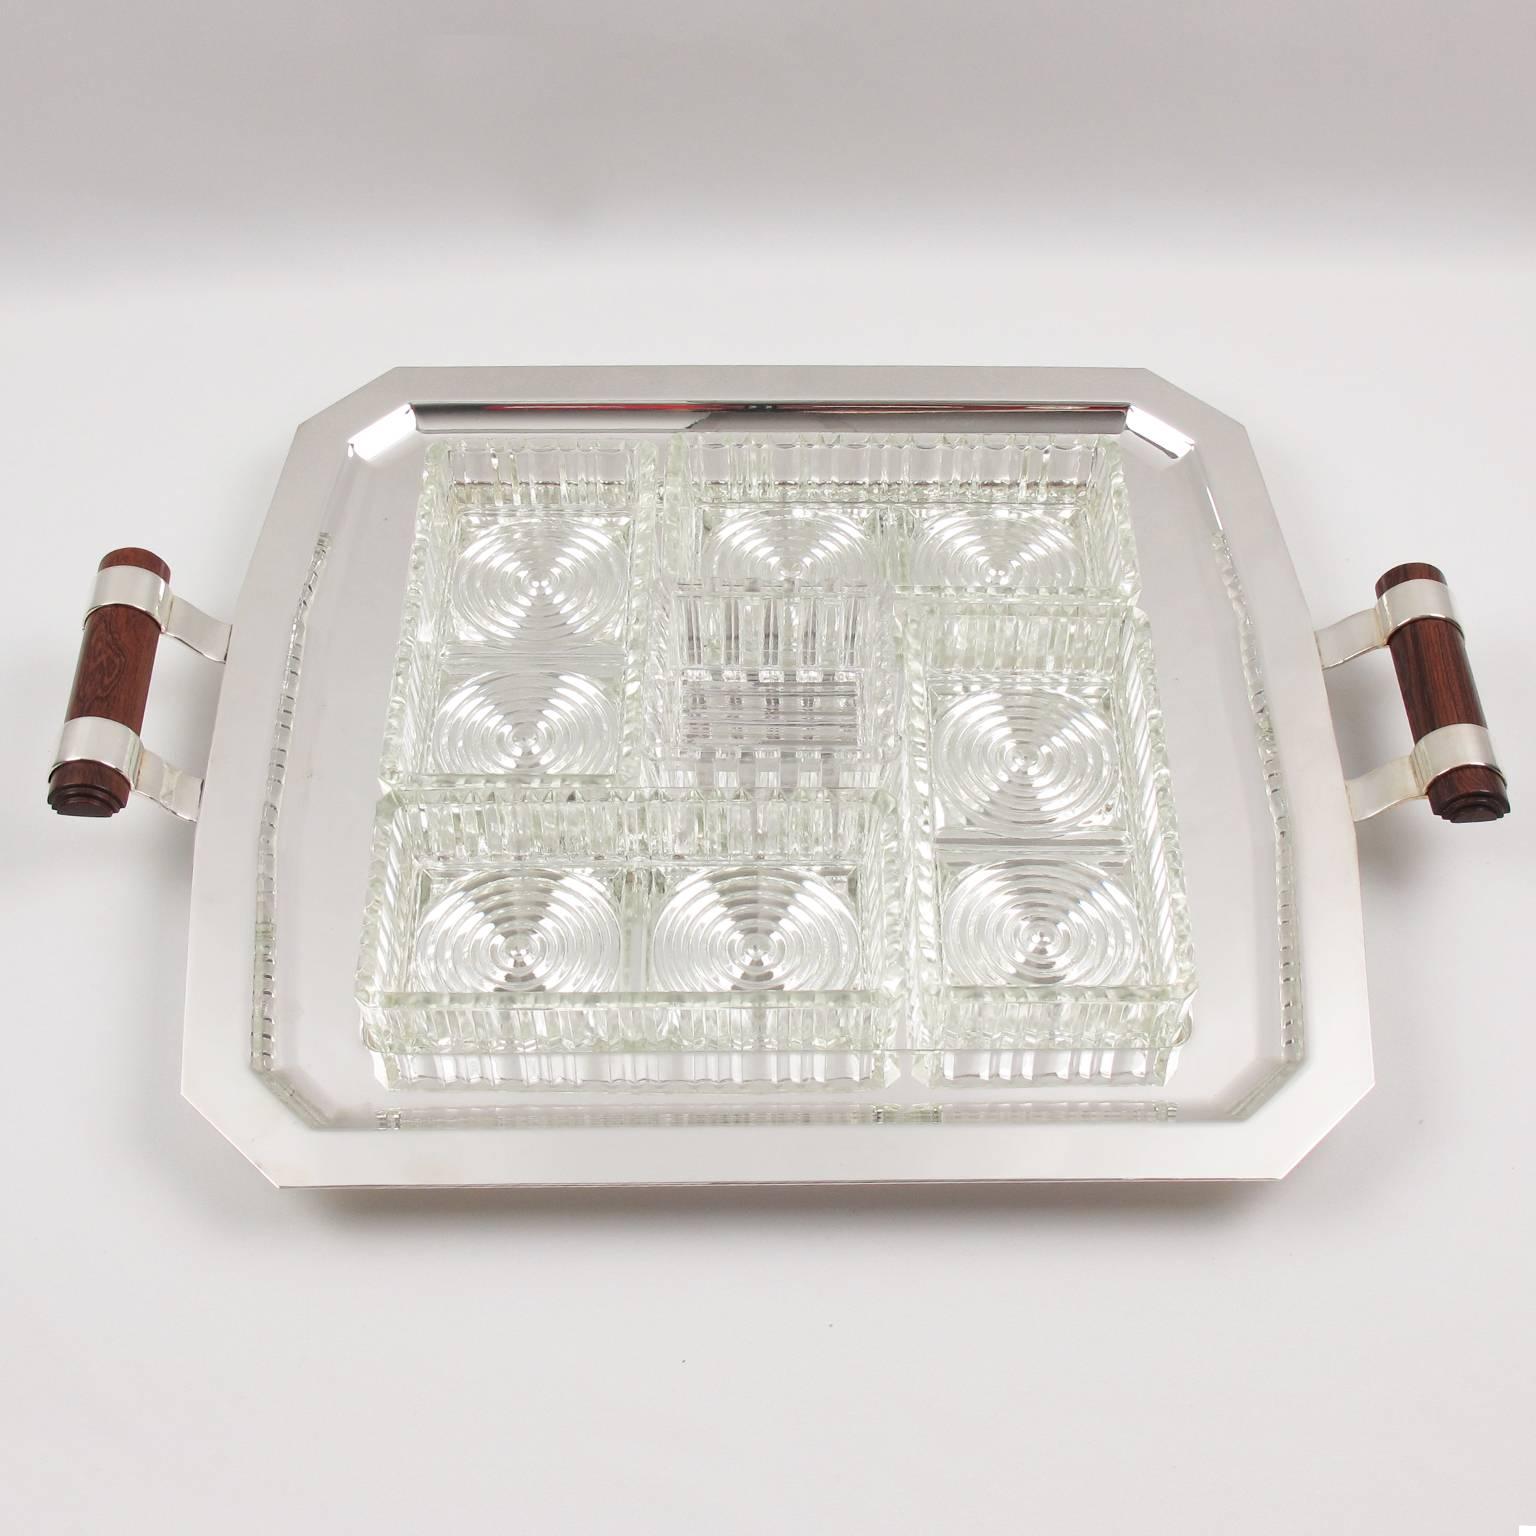 Elegant vintage French Art Deco barware serving set for hors d'oeuvres or appetizers. Featuring a stunning silver plate large square serving tray with Macassar wood handles. Five serving dishes, four rectangular for vegetables or olives and one tall